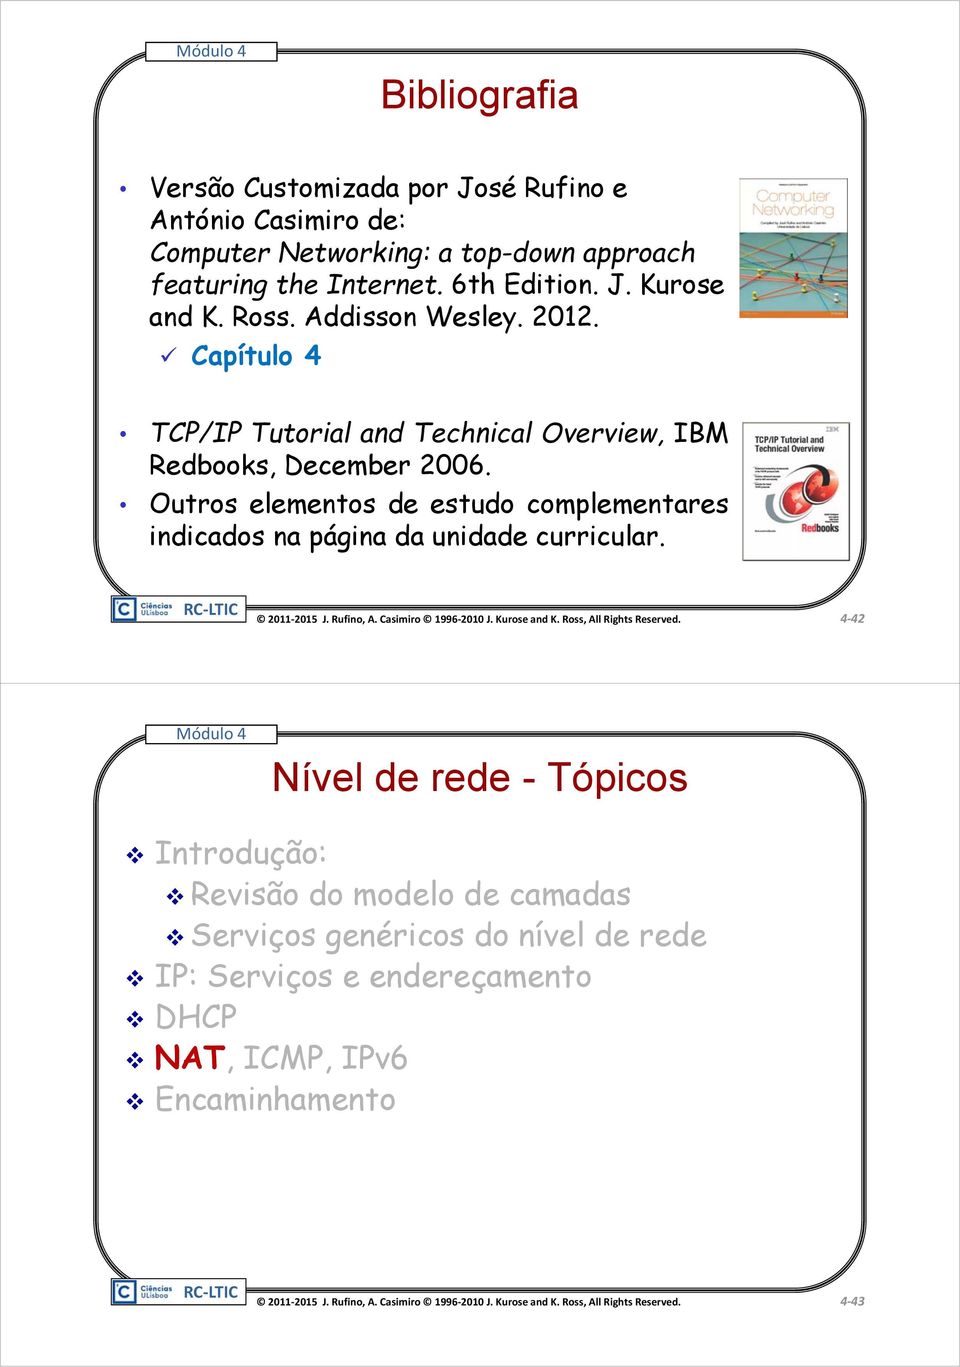 Capítulo 4 TCP/IP Tutorial and Technical Overview, IBM Redbooks, December 2006.